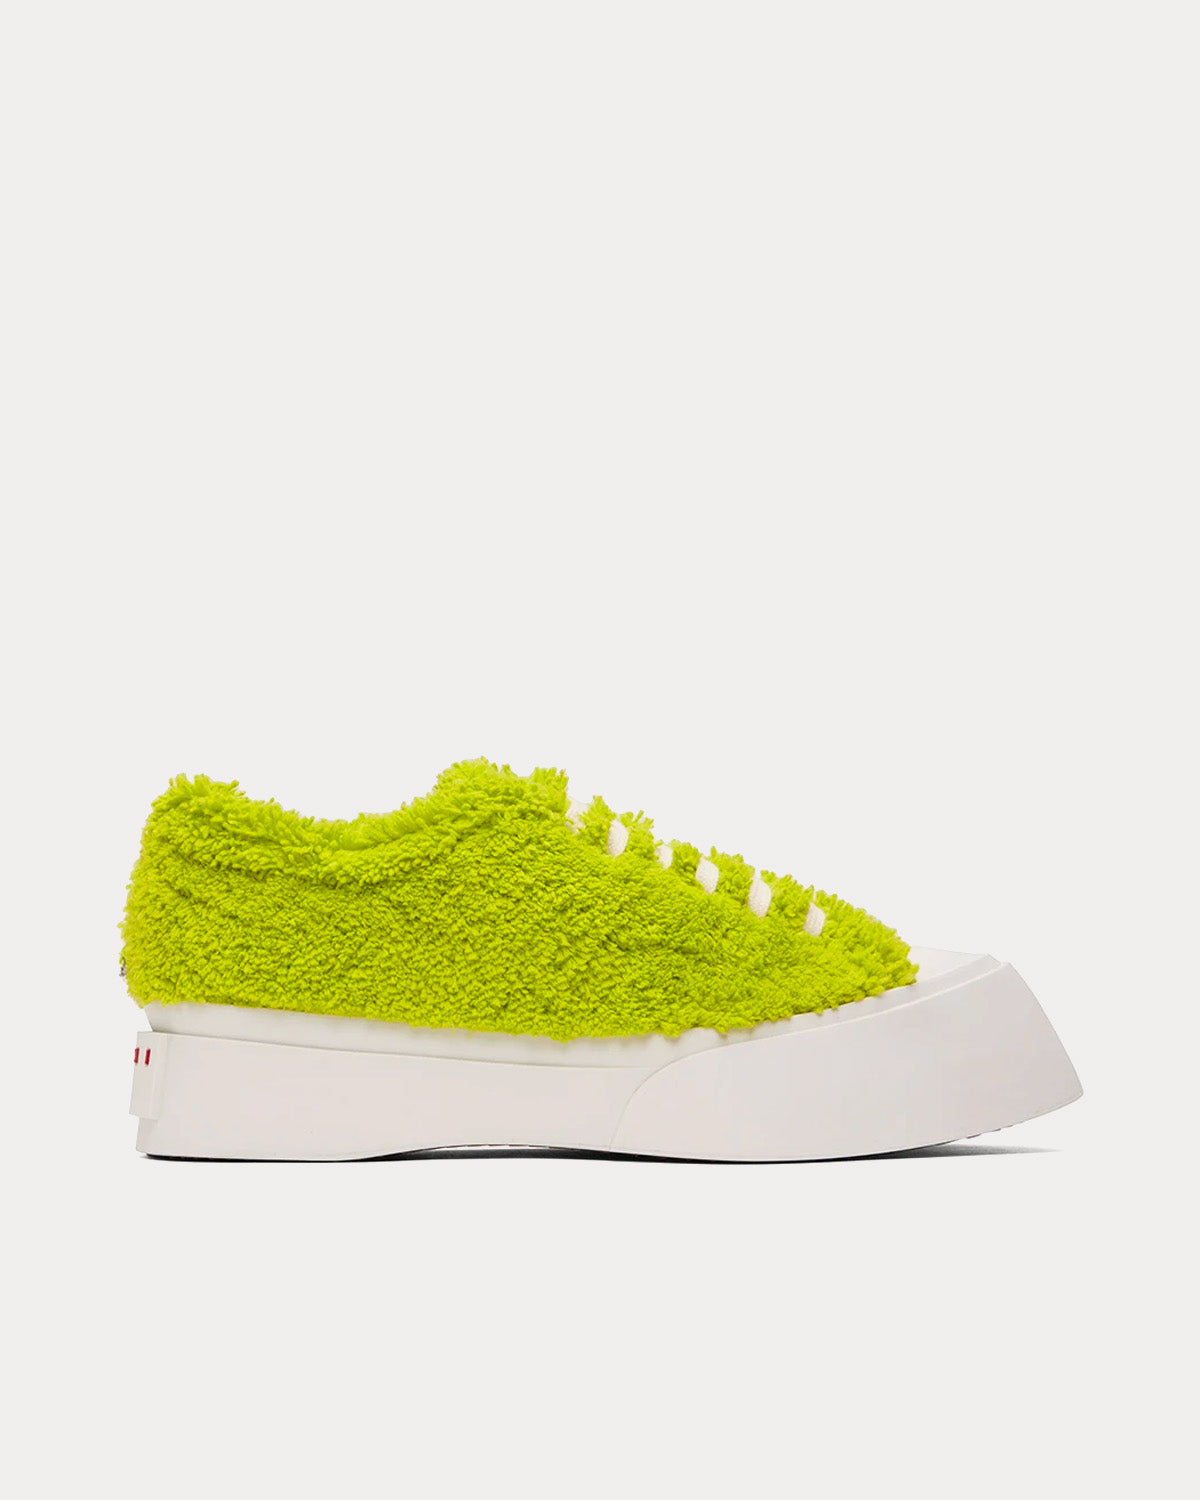 Marni - Pablo Terry Green Low Top Sneakers